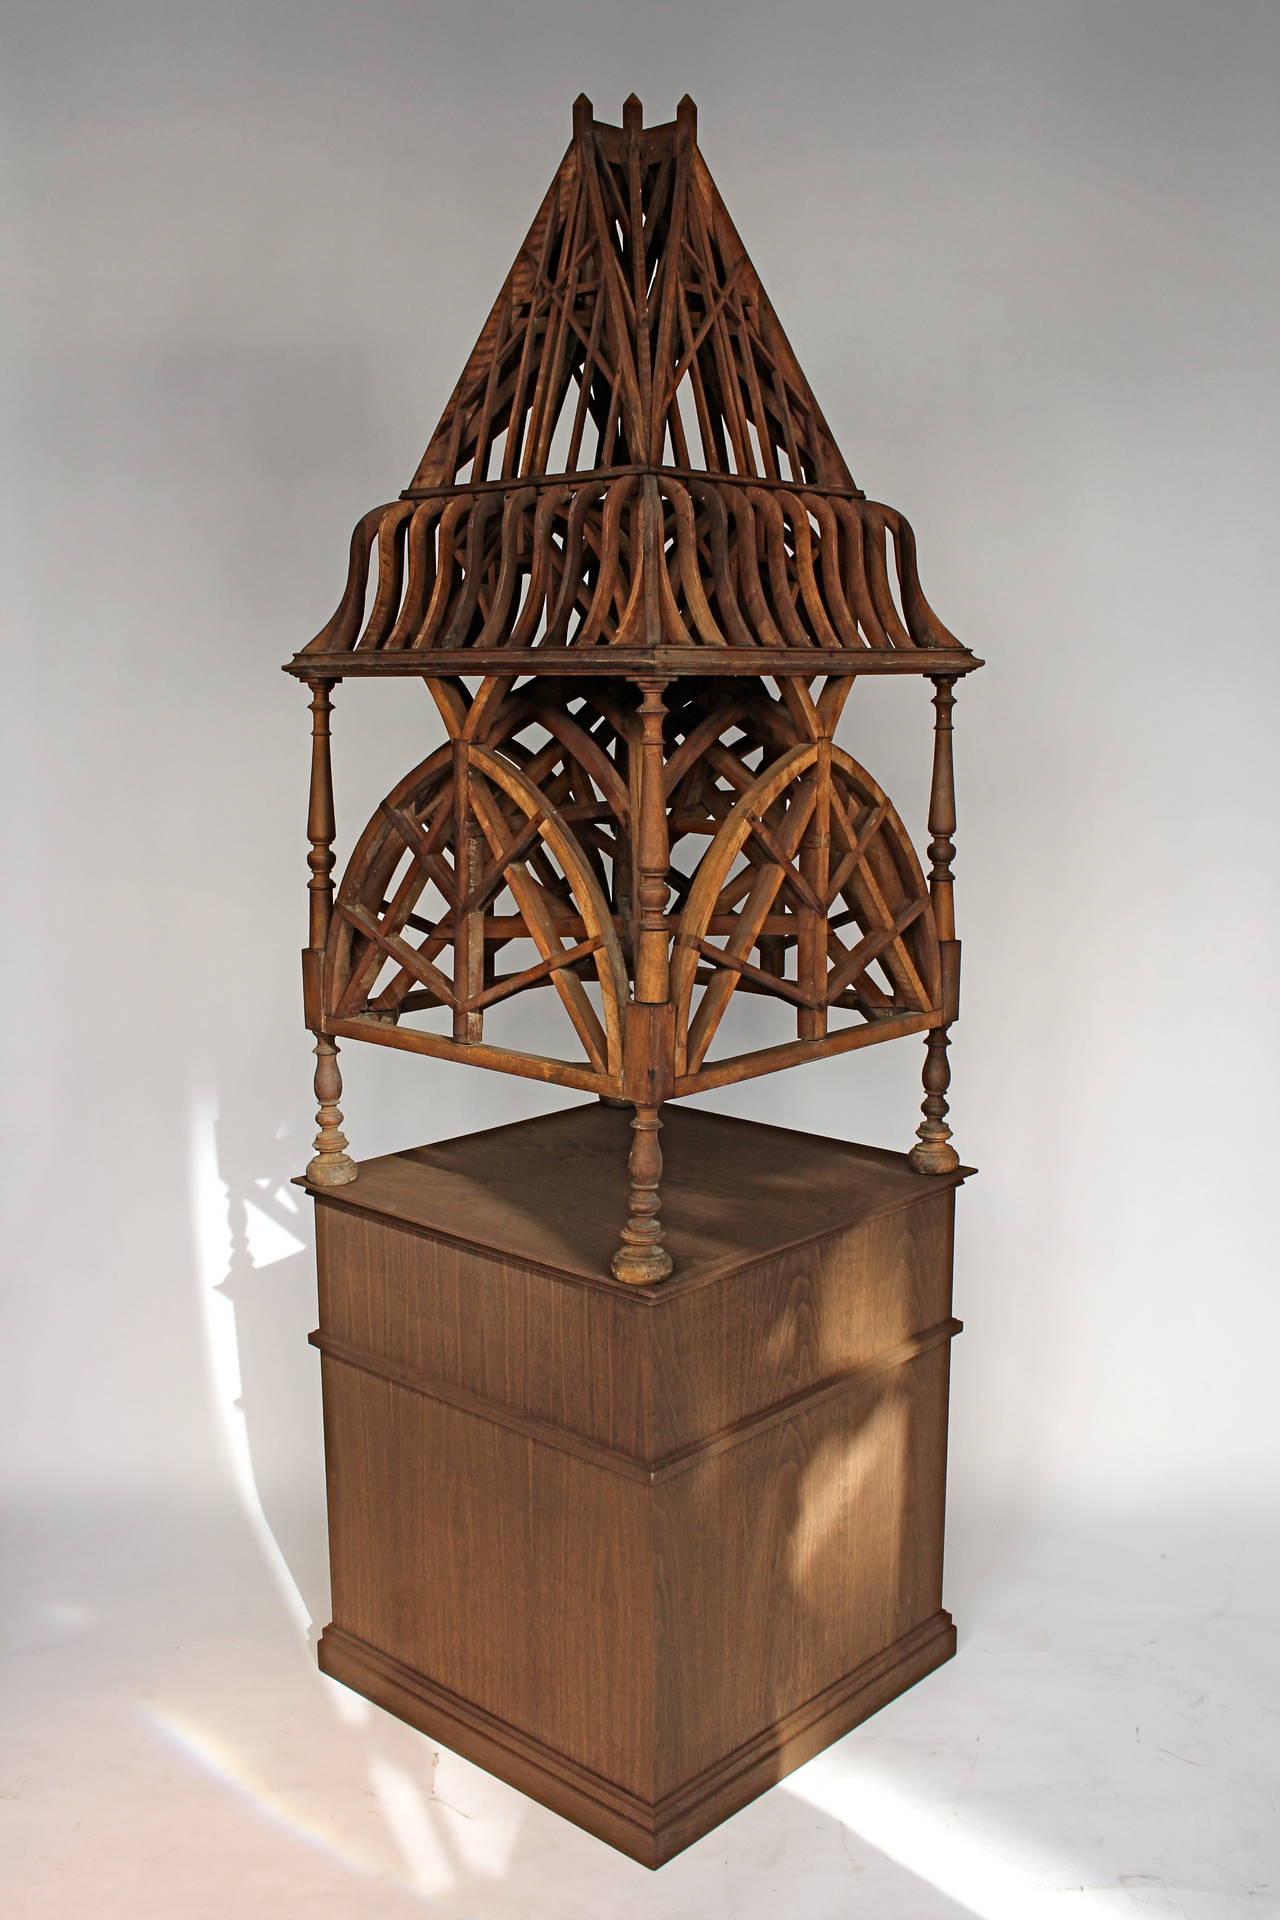 Pièce de maîtrise (master piece) in walnut on a new base,
French, 19th century.
These arts of works where made by the high level of furniture makers to enter the guild of France.